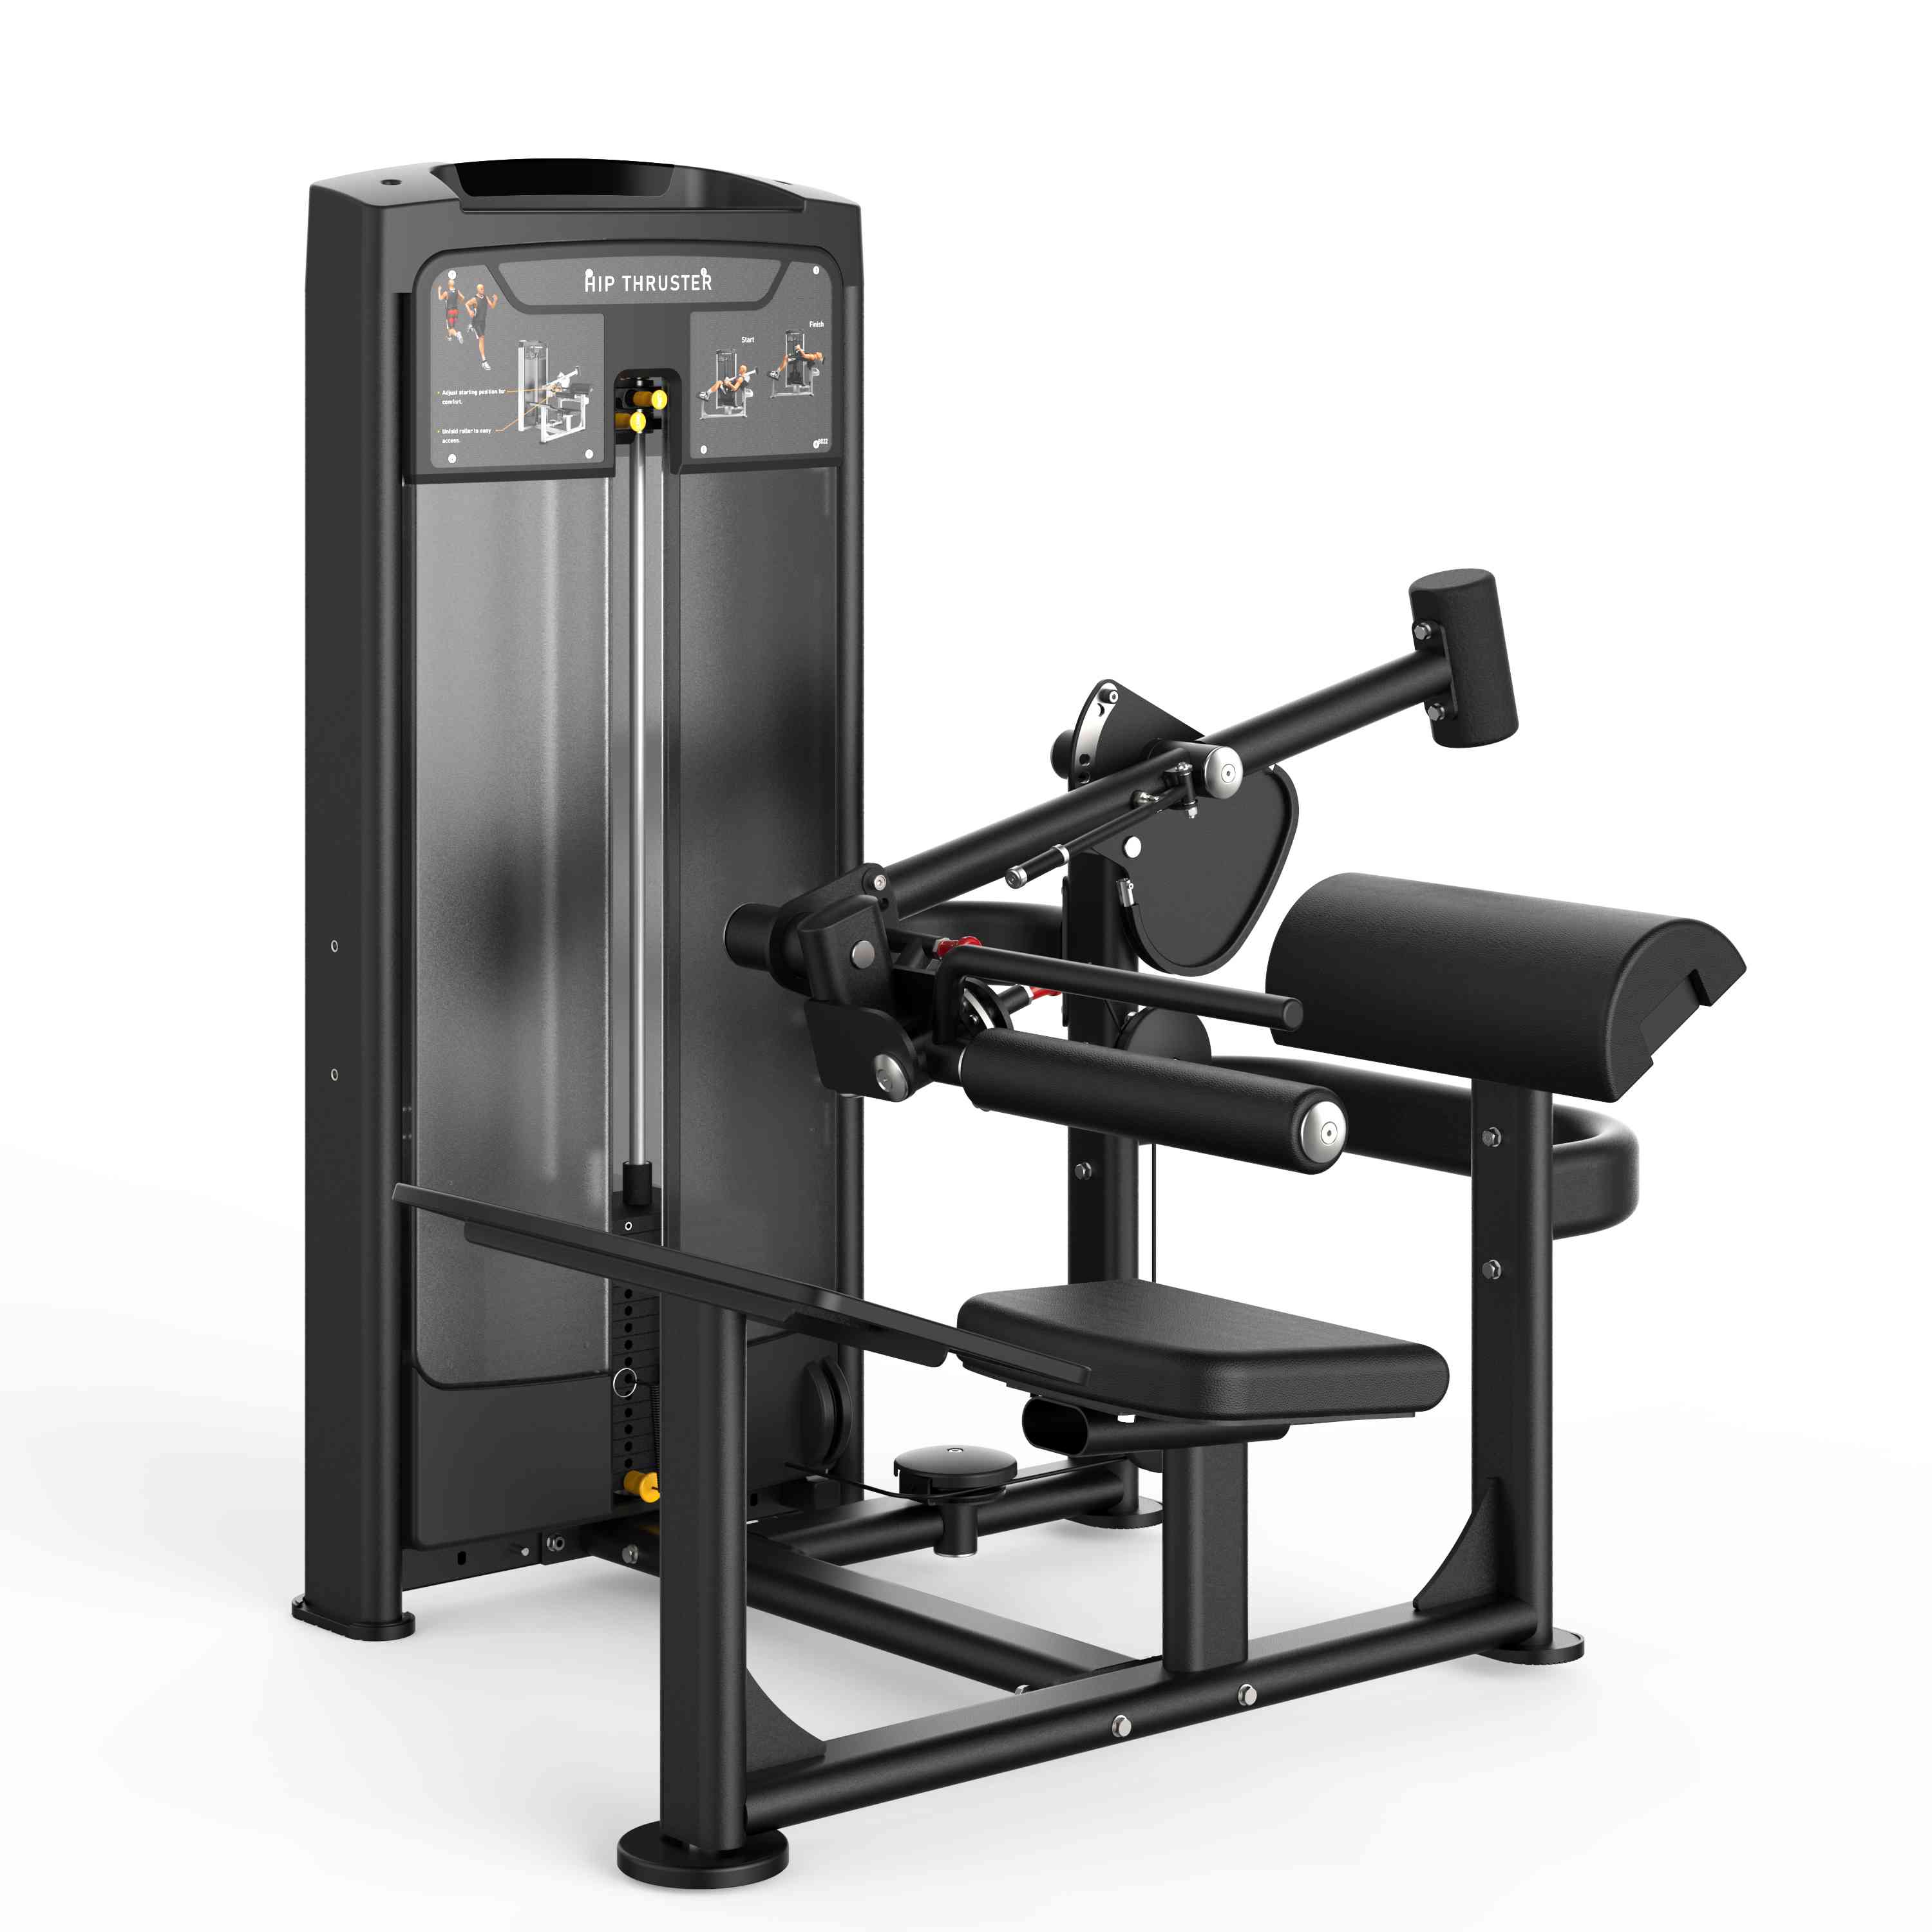 Insight Fitness Re Series Hip Thruster RE8022